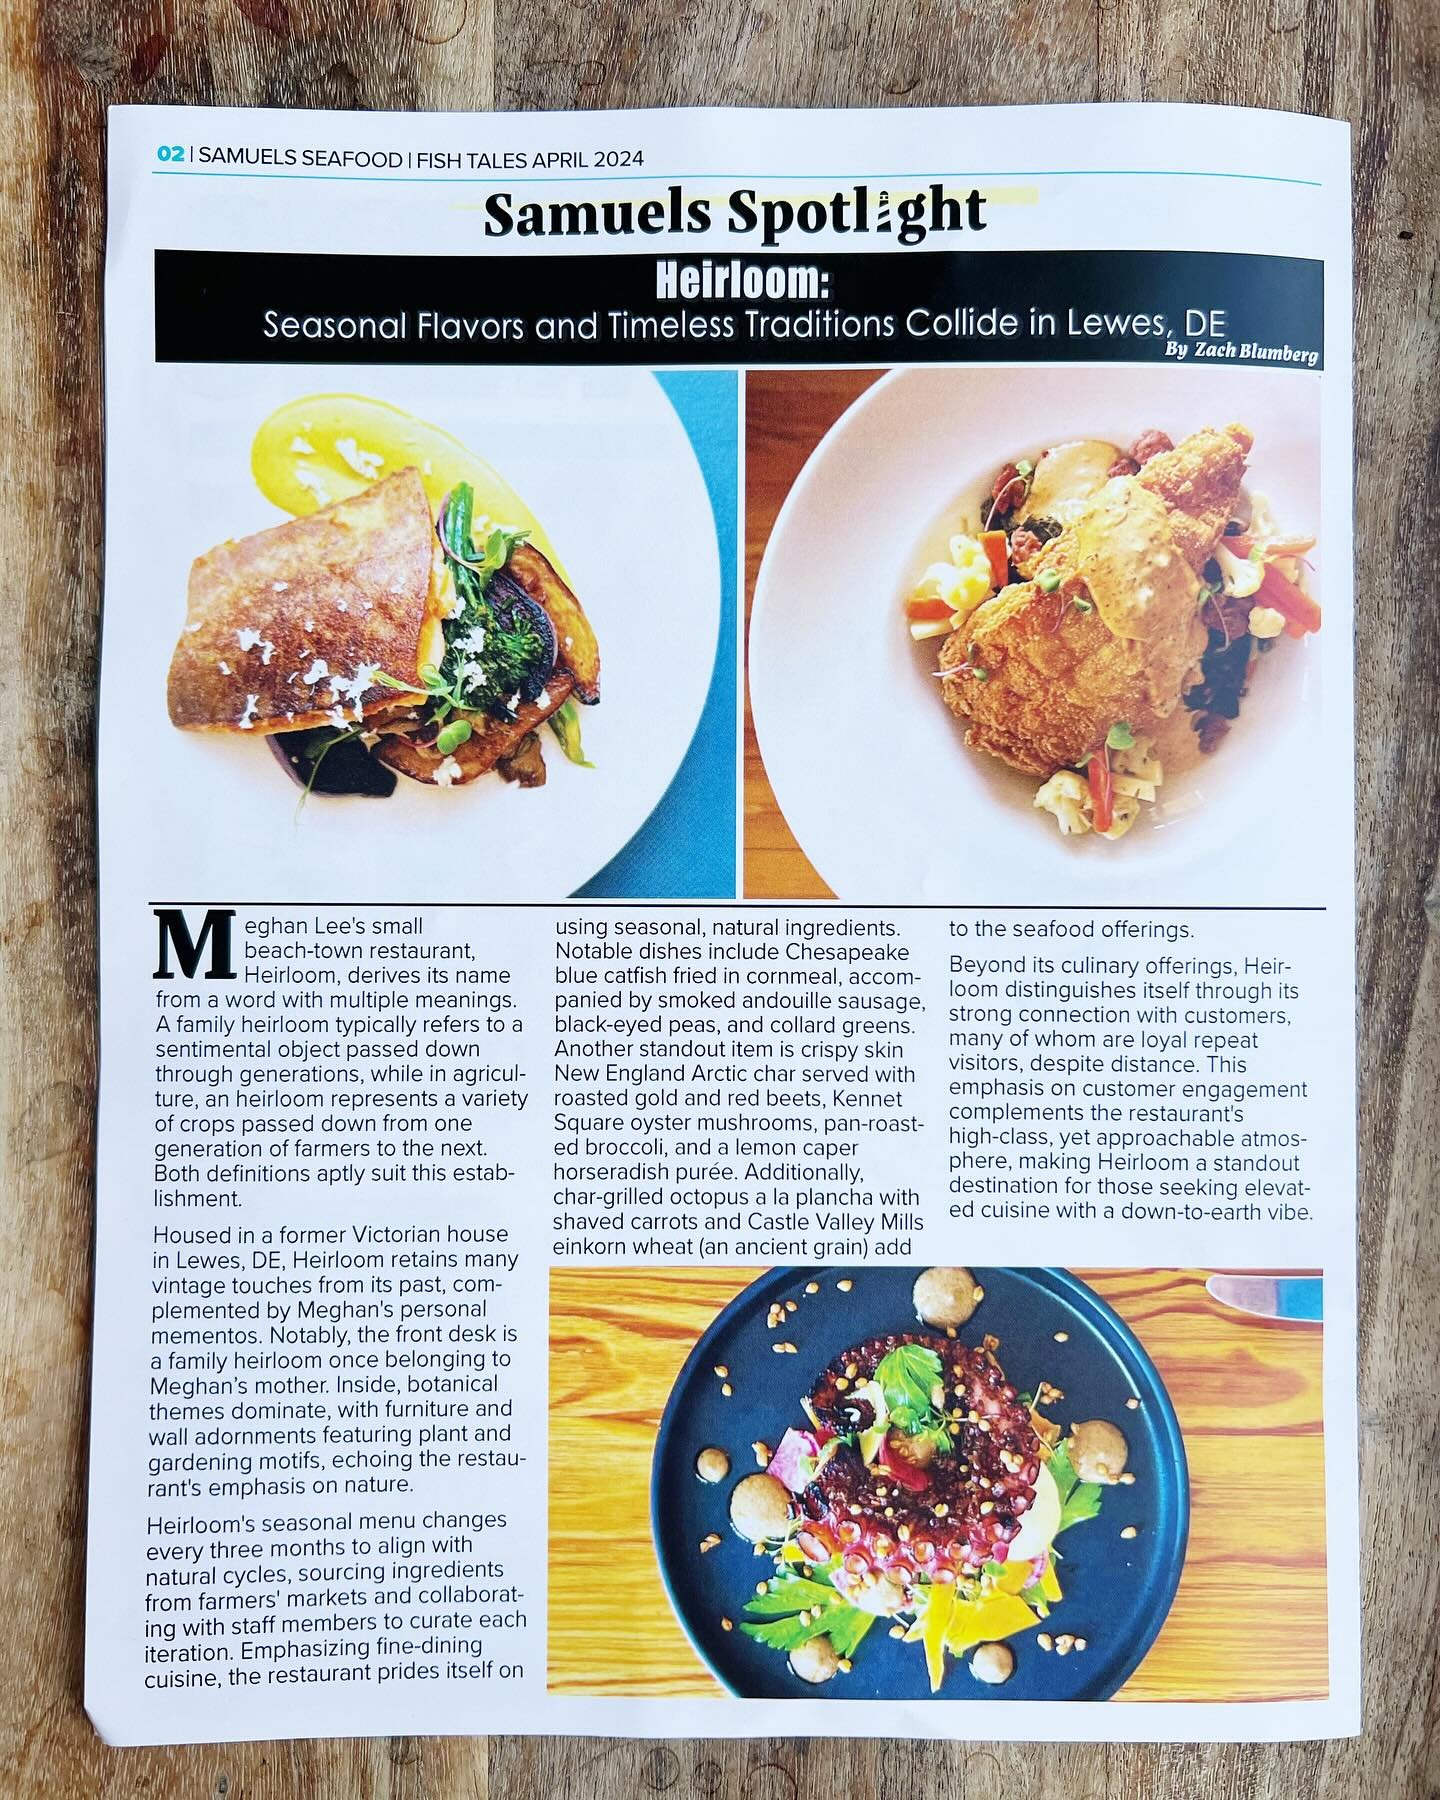 🥁shoutout🥁

thanks to @samuelsseafood 
for featuring Heirloom in your
seasonal company newsletter!!!

super proud of this squad, both front &amp; back of house, who continue to create amazing food and give extraordinary service to all our loyal gue